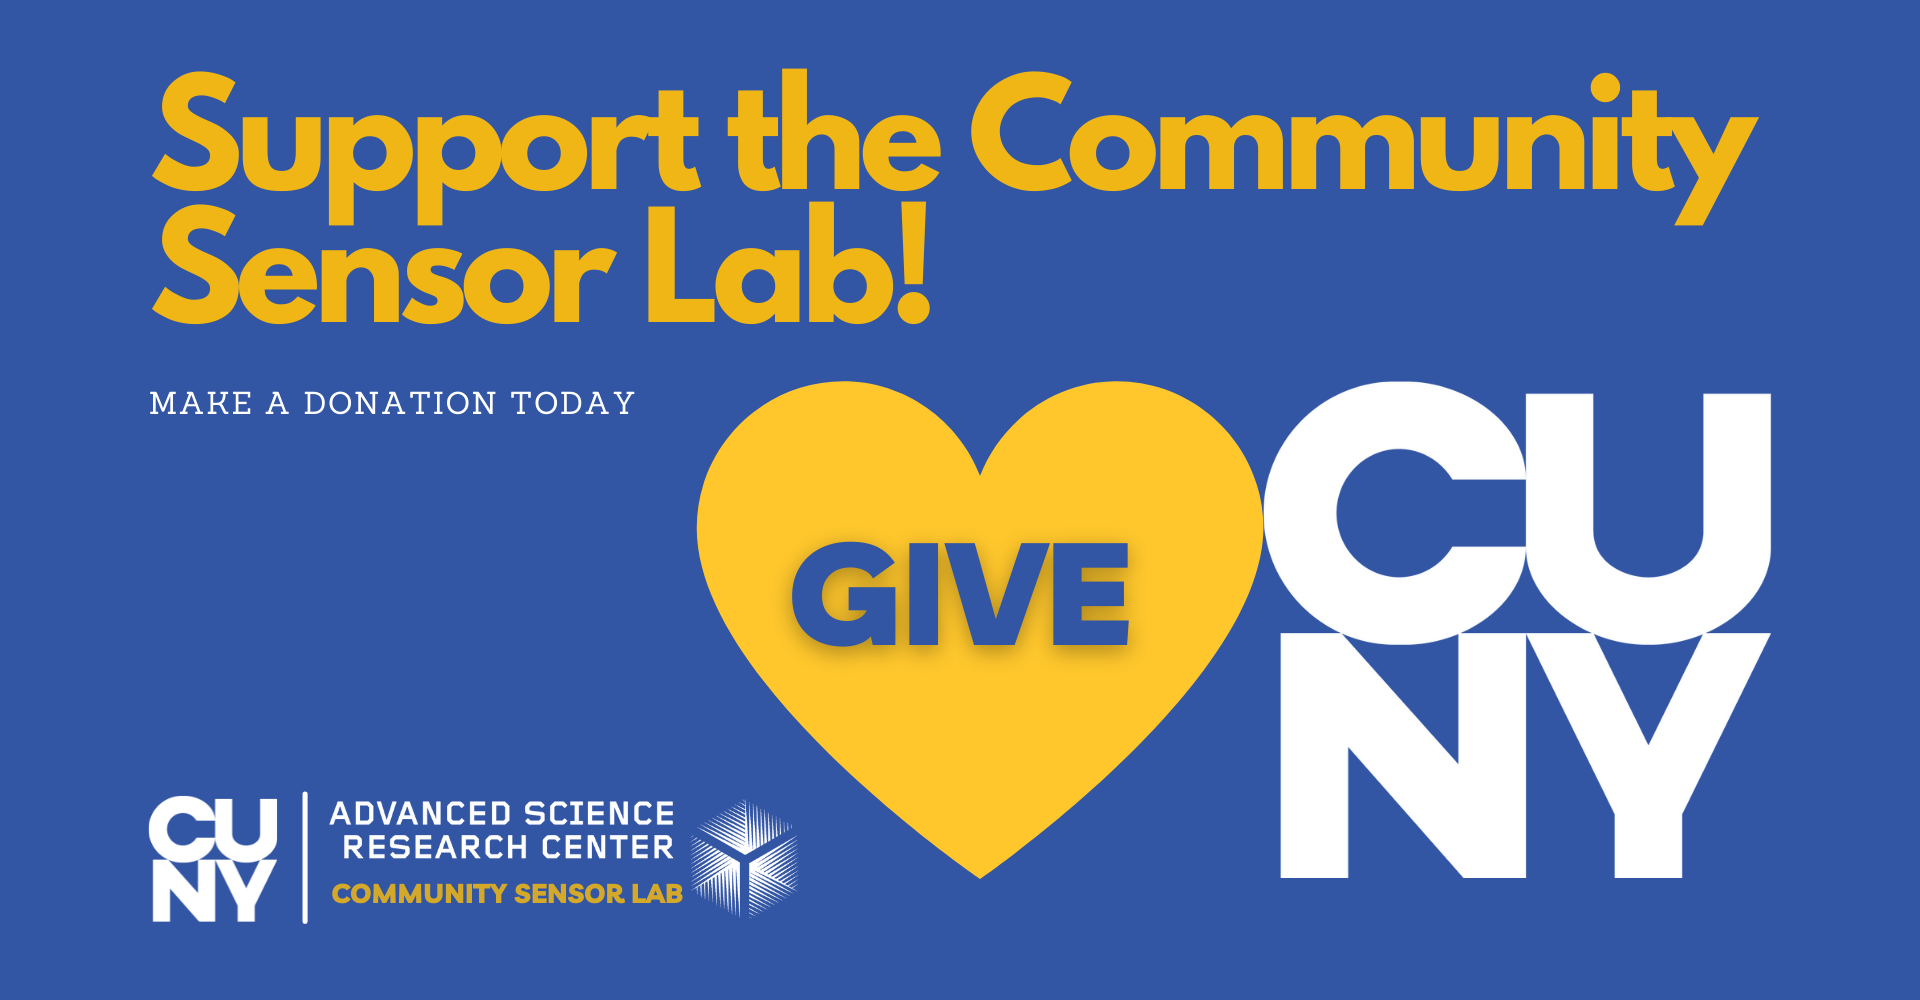 Blue banner with the CUNY ASRC and GIVE CUNY logos and writing in gold and white: "Support the Community Sensor Lab! Make a donation today."